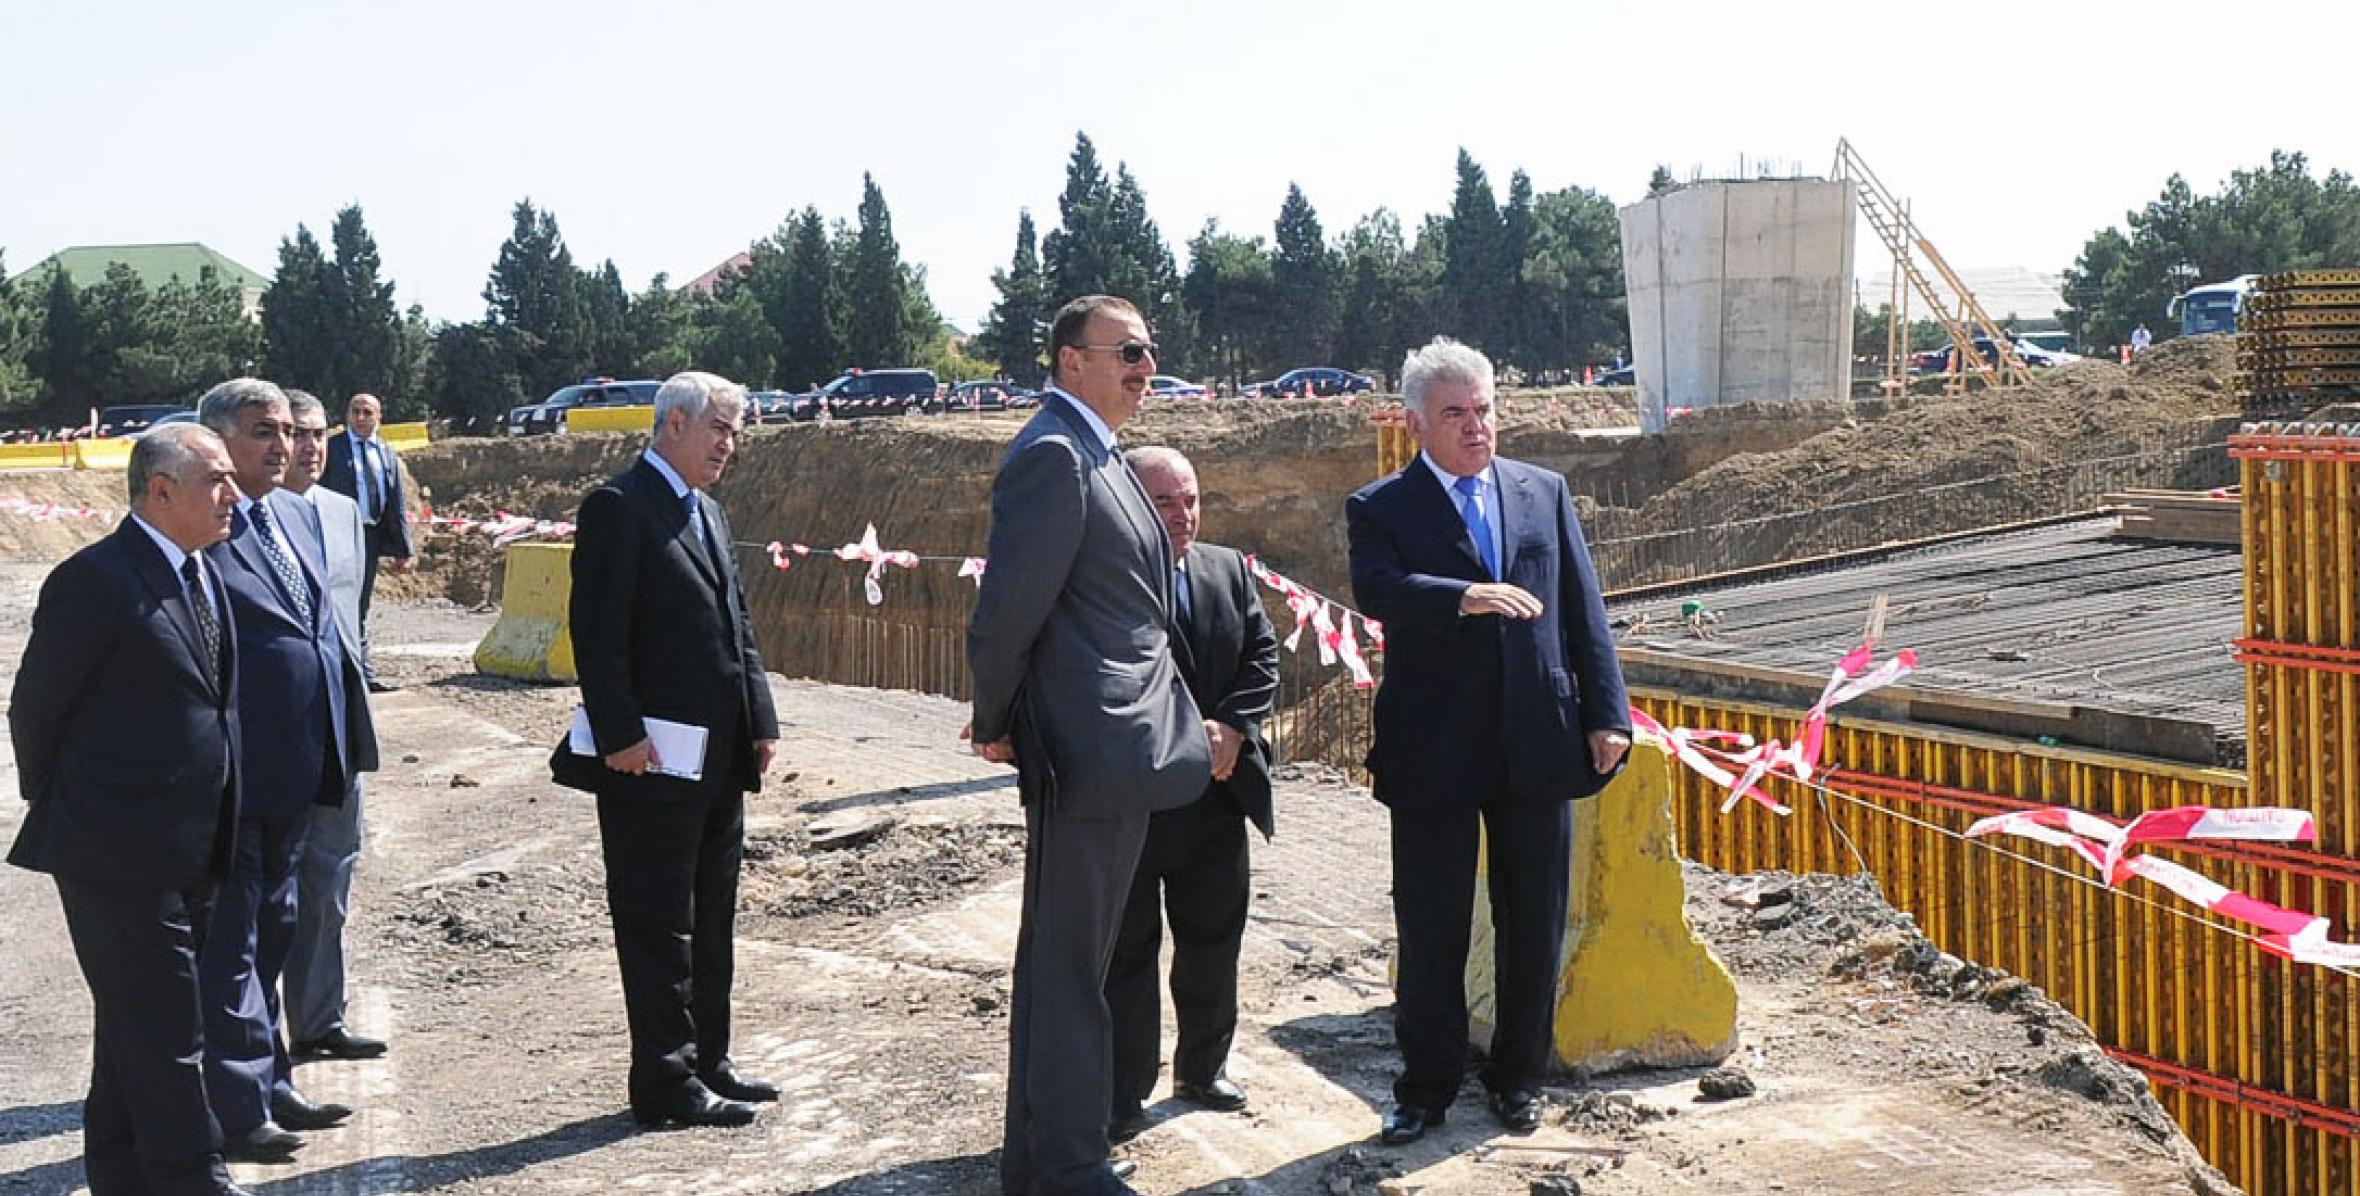 Ilham Aliyev was familiarized with progress in expansion and construction of motor roads